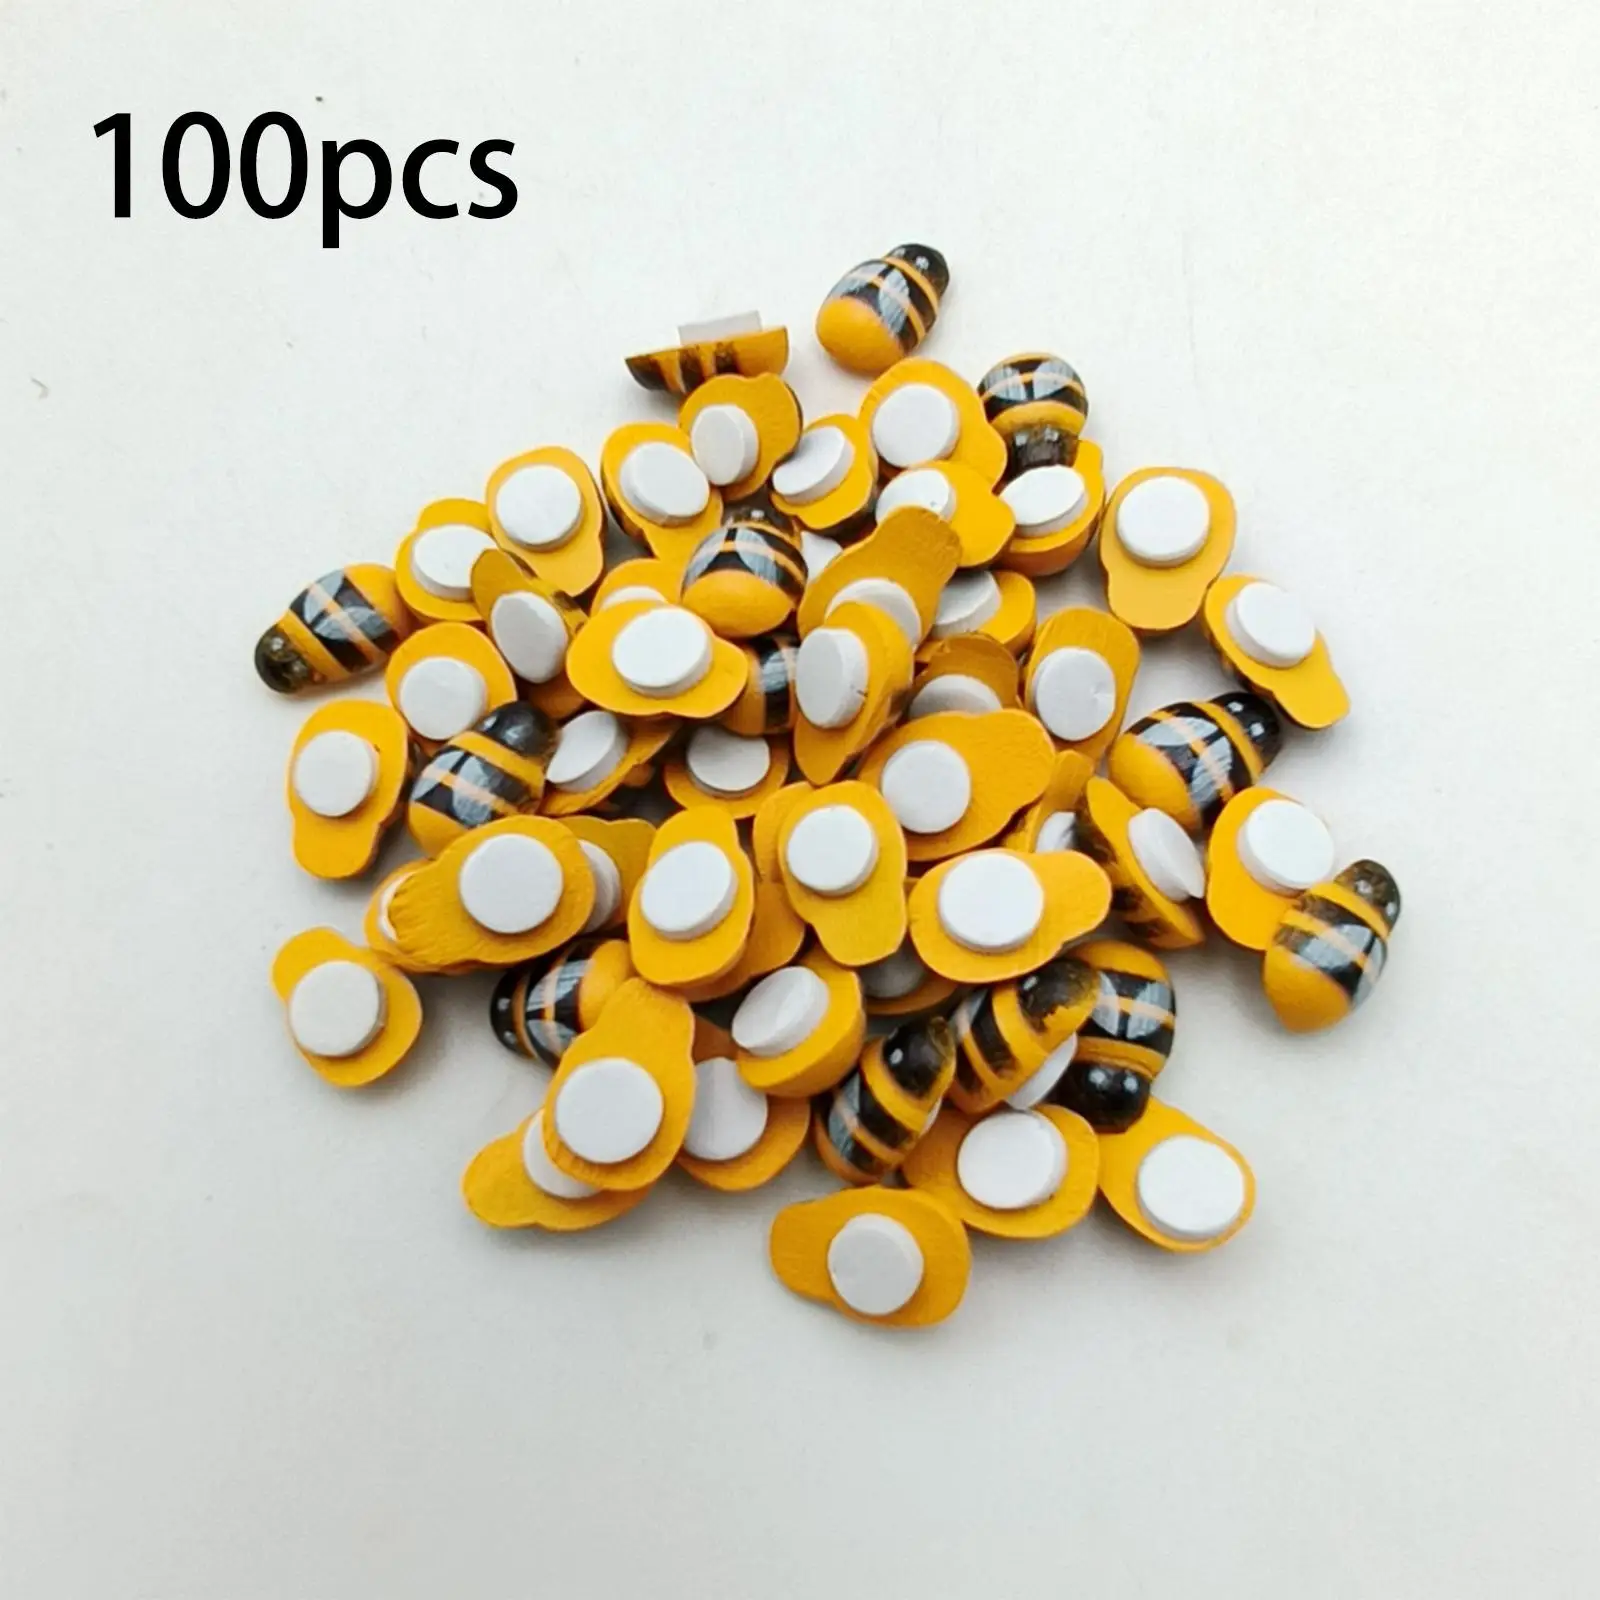 100x Flatback Embellishment Handicrafts Brooch Bees Stickers for Crafts for Shoes Invitations Hair Bow Center Craft Hats Dress